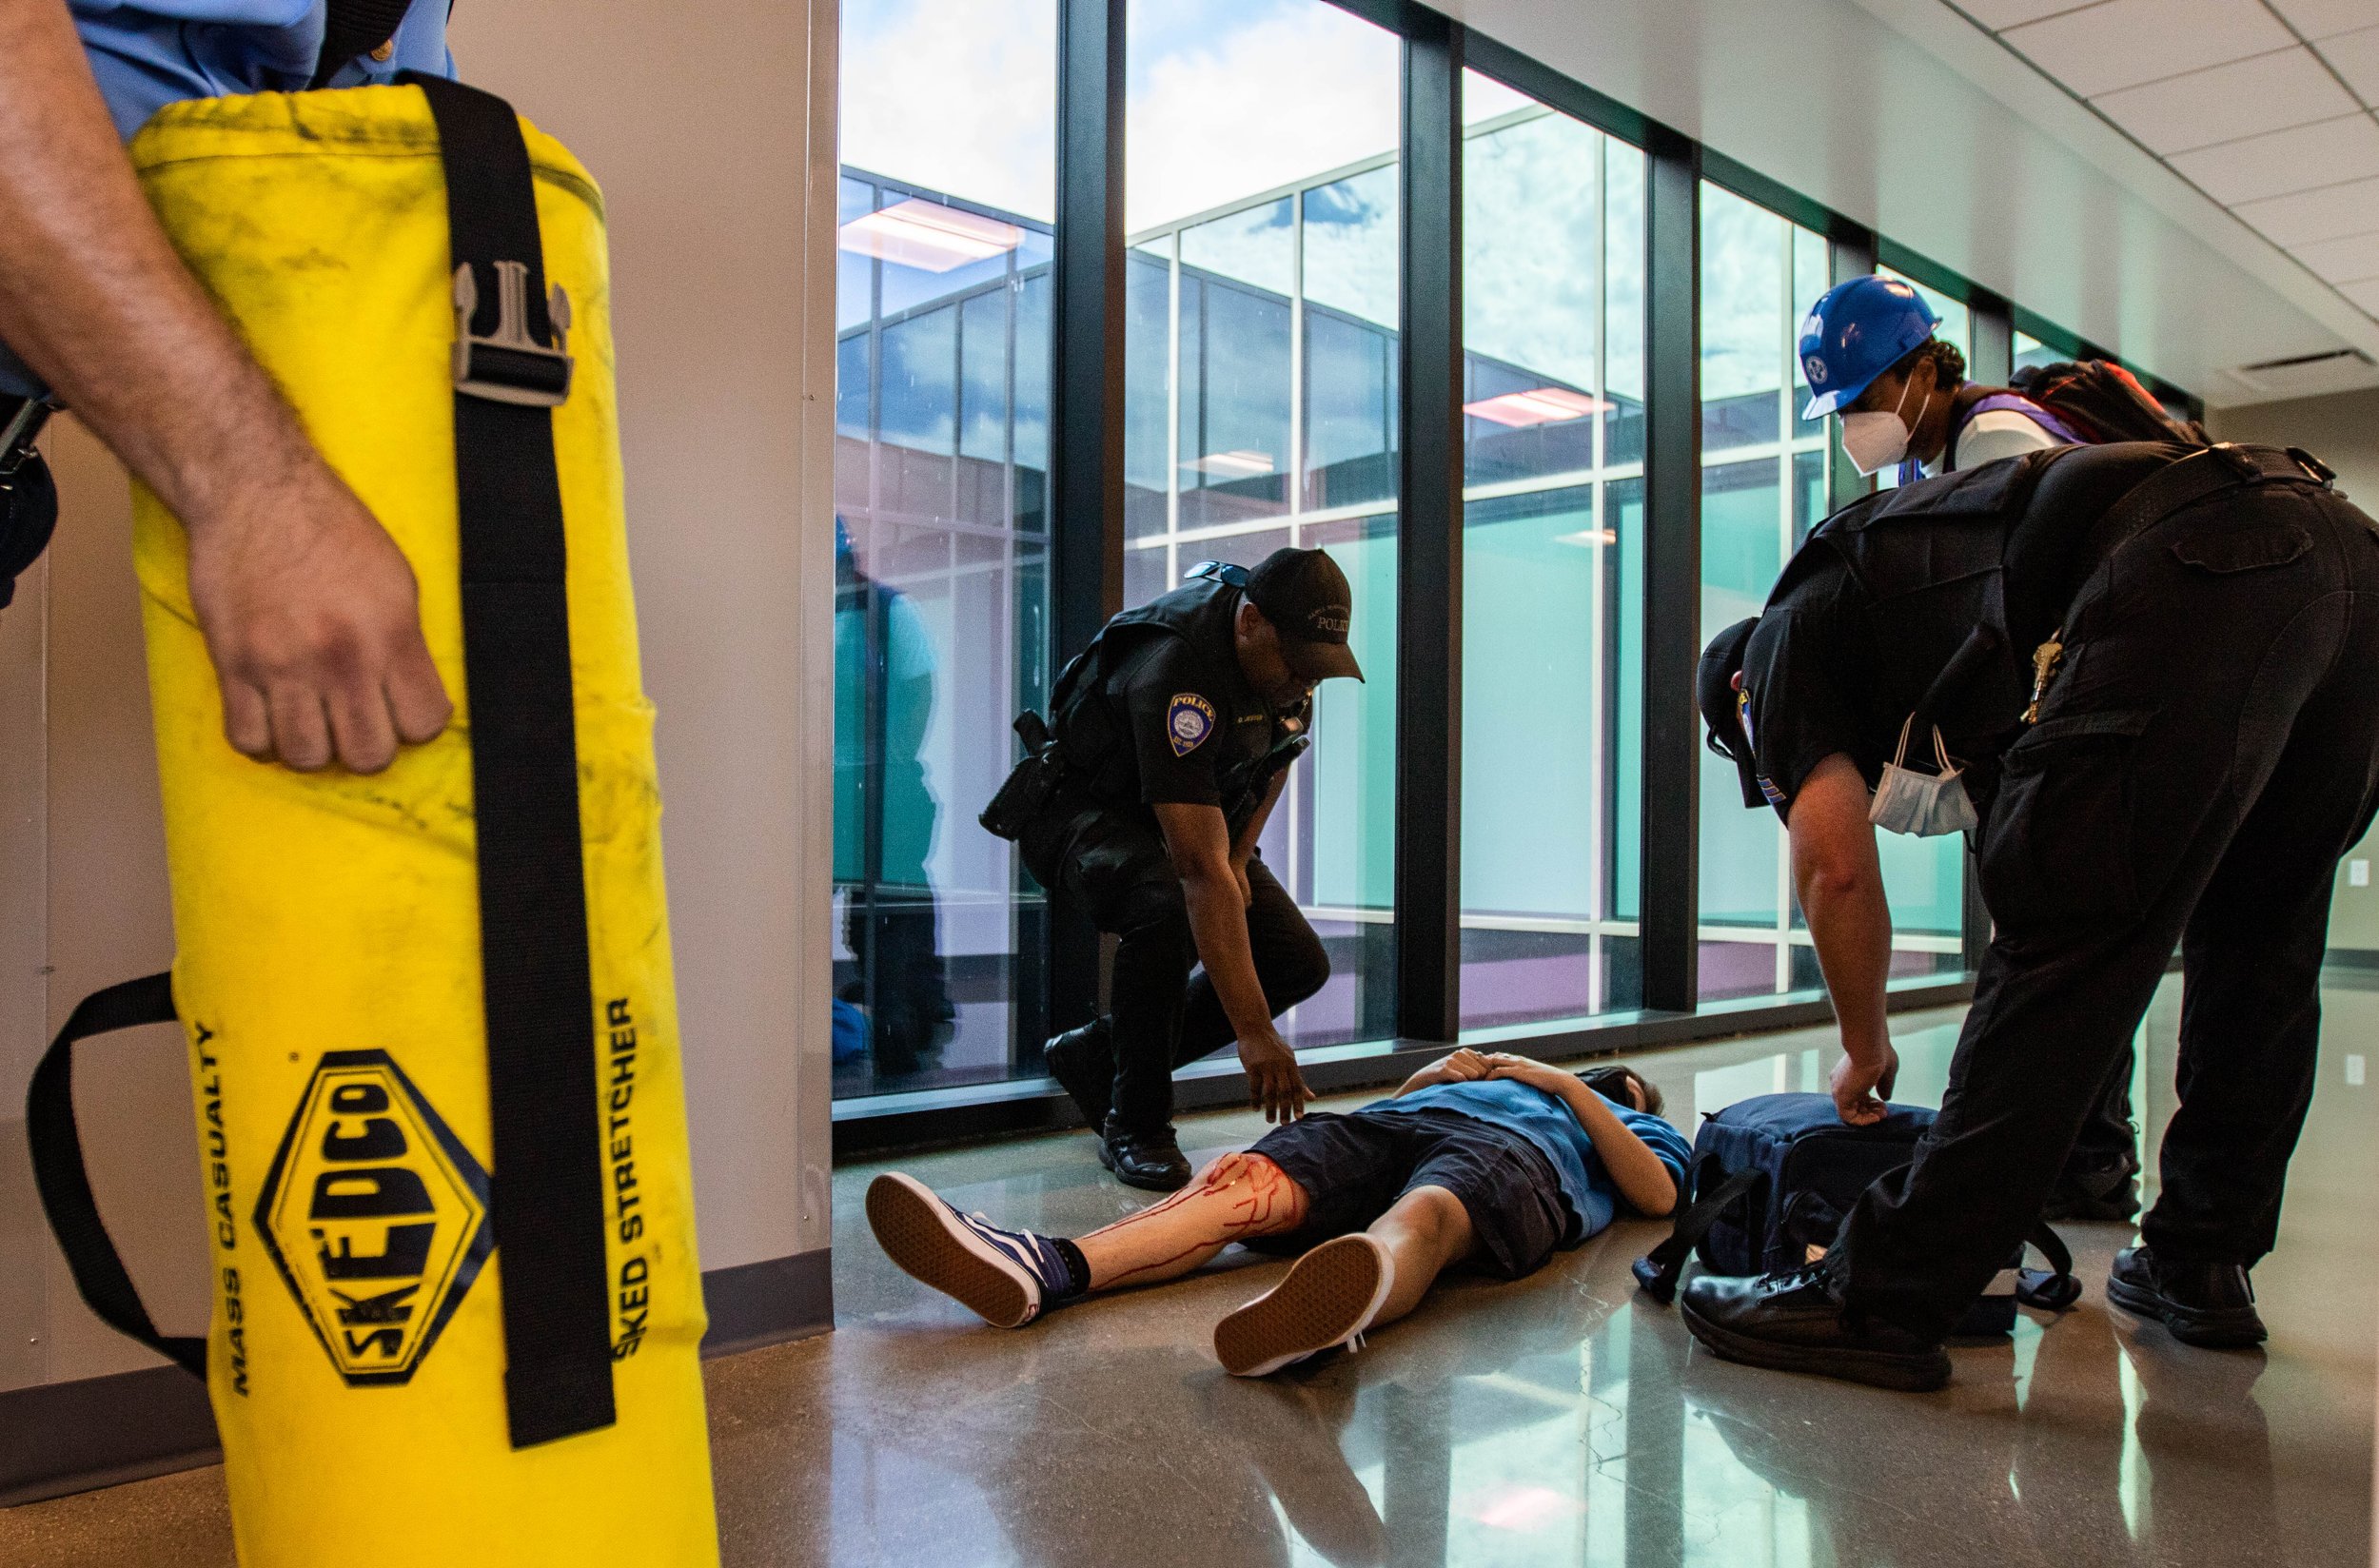  Alex Bonin, one of the simulated injury drill participants of the 2022 ShakeOut SoCal Earthquake Drill and Media Event receives assistance from the Santa Monica College (SMC) Police Department and Campus Emergency Response team as they evacuate Boni